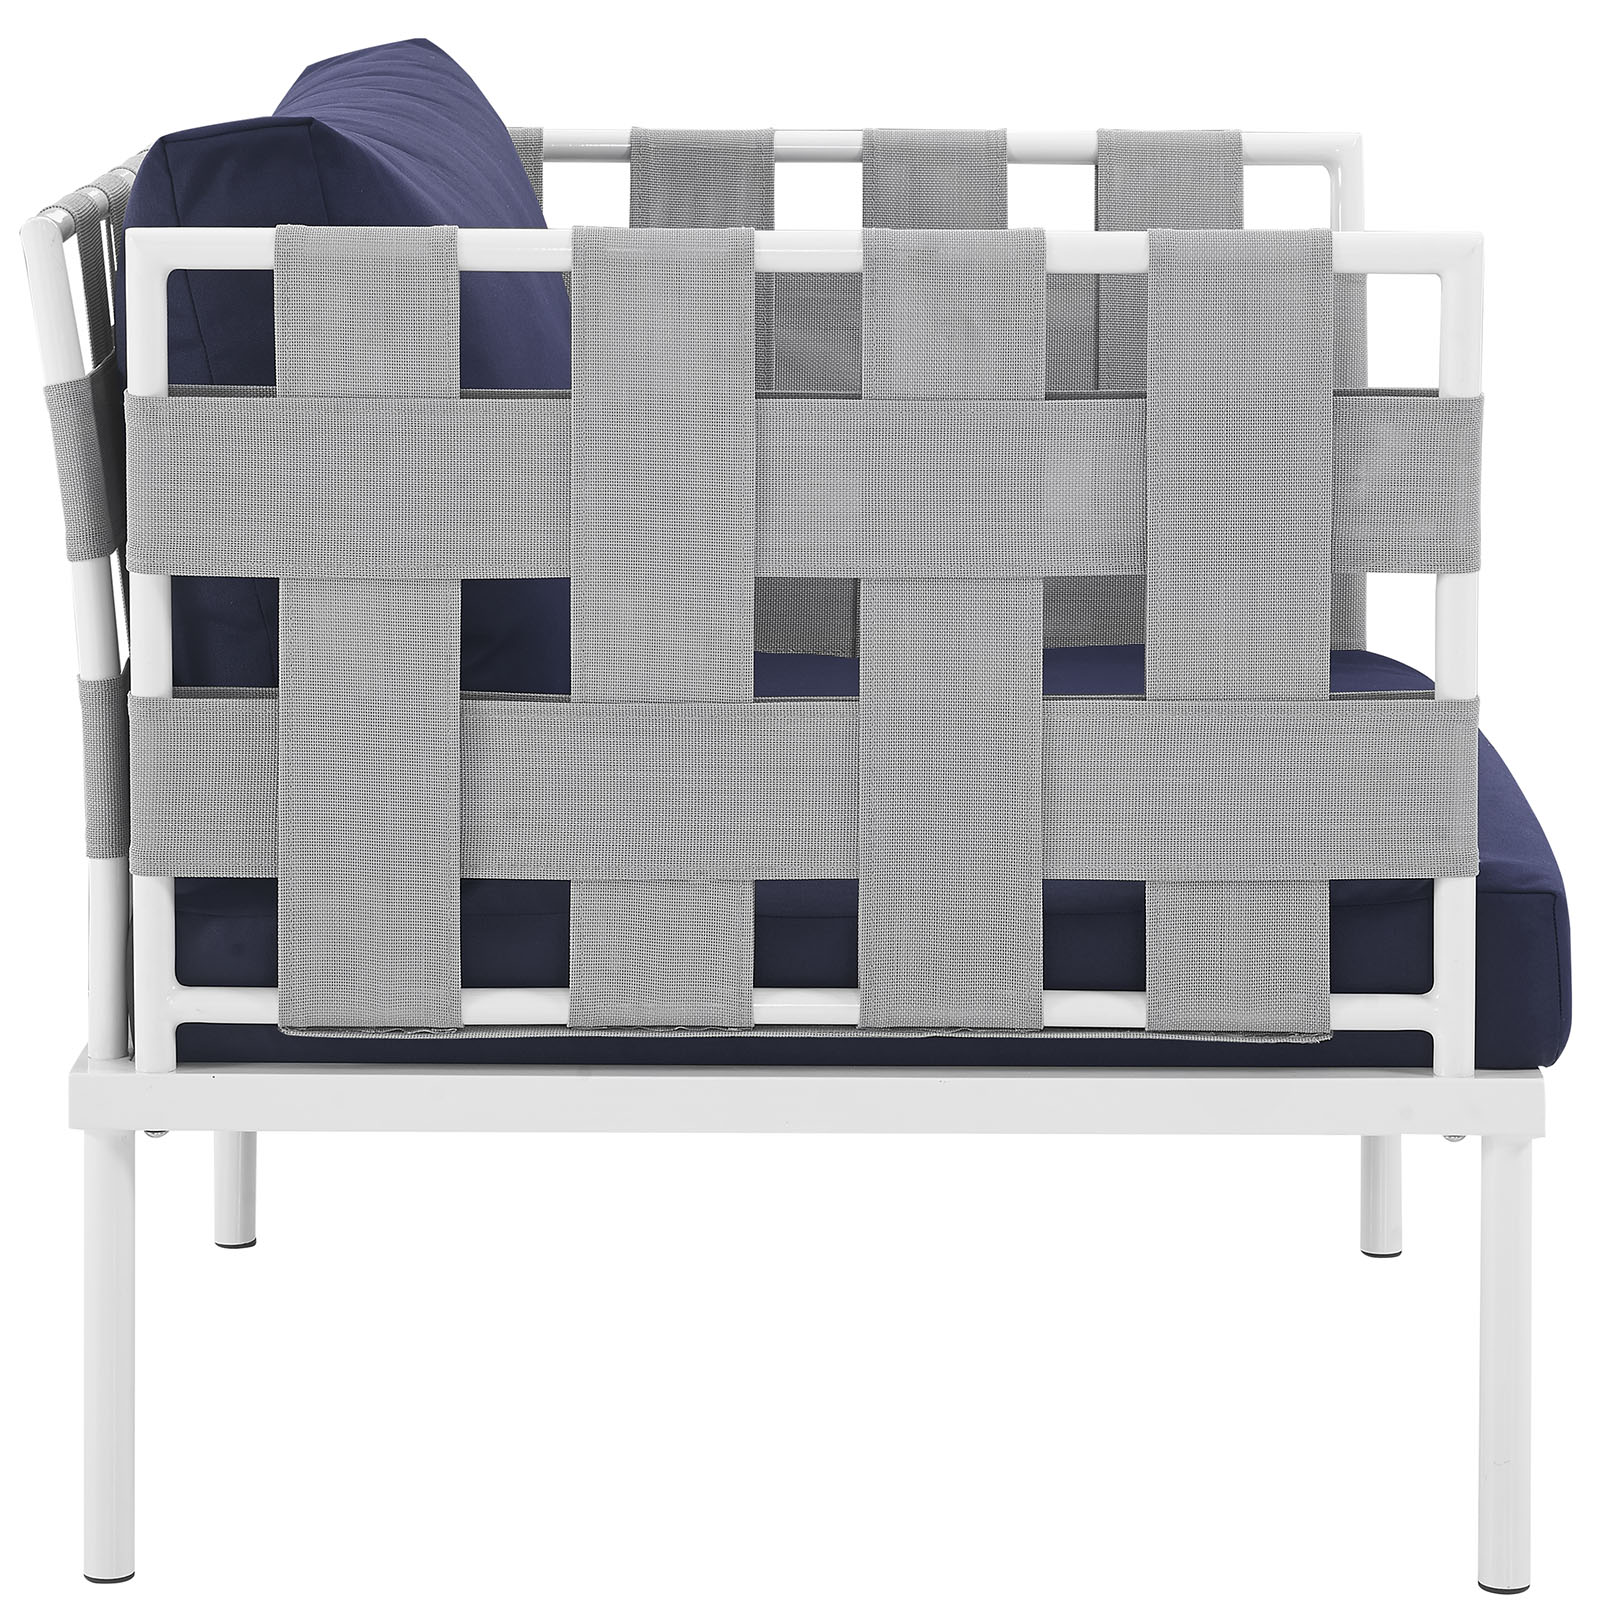 Modern Contemporary Urban Design Outdoor Patio Balcony Lounge Chair, Navy Blue White, Rattan - image 3 of 5